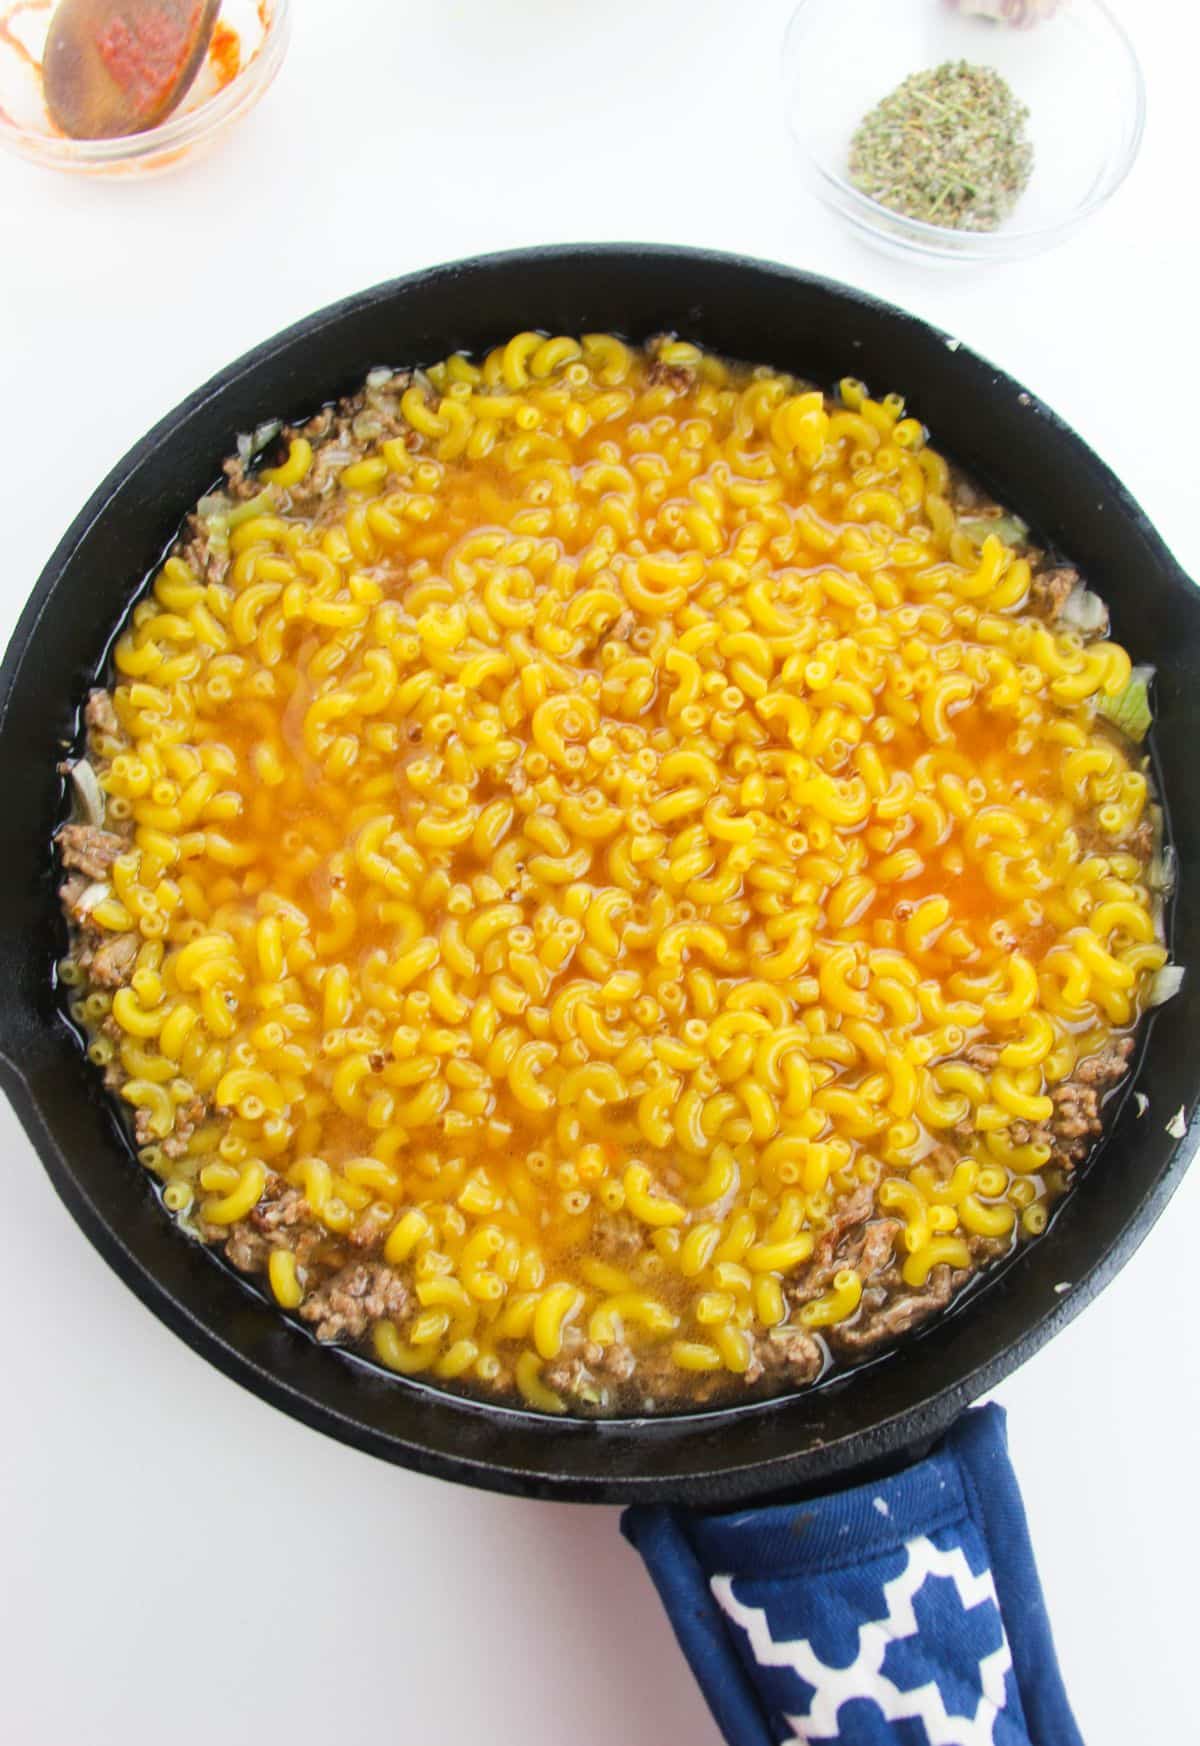 tomato paste, broth, uncooked pasta are added into the skillet.